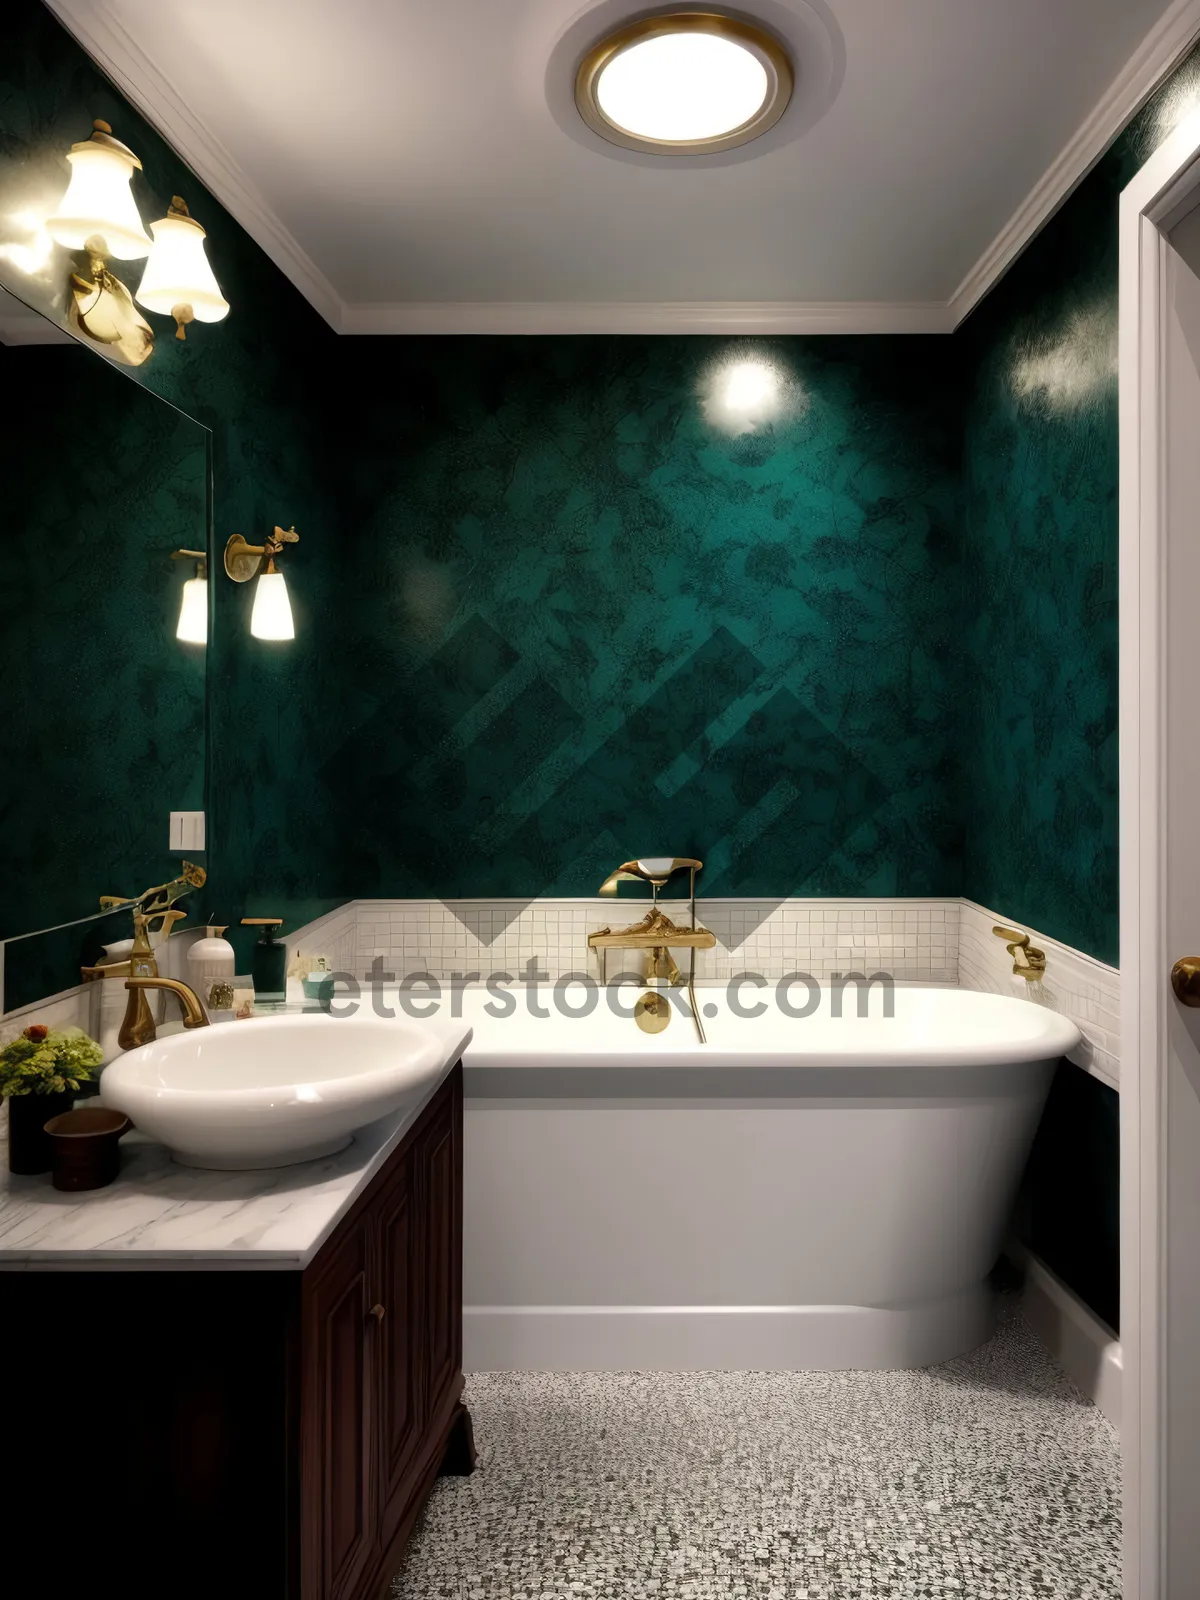 Picture of Modern Luxury Bathroom with Clean Tile and Stylish Fixtures